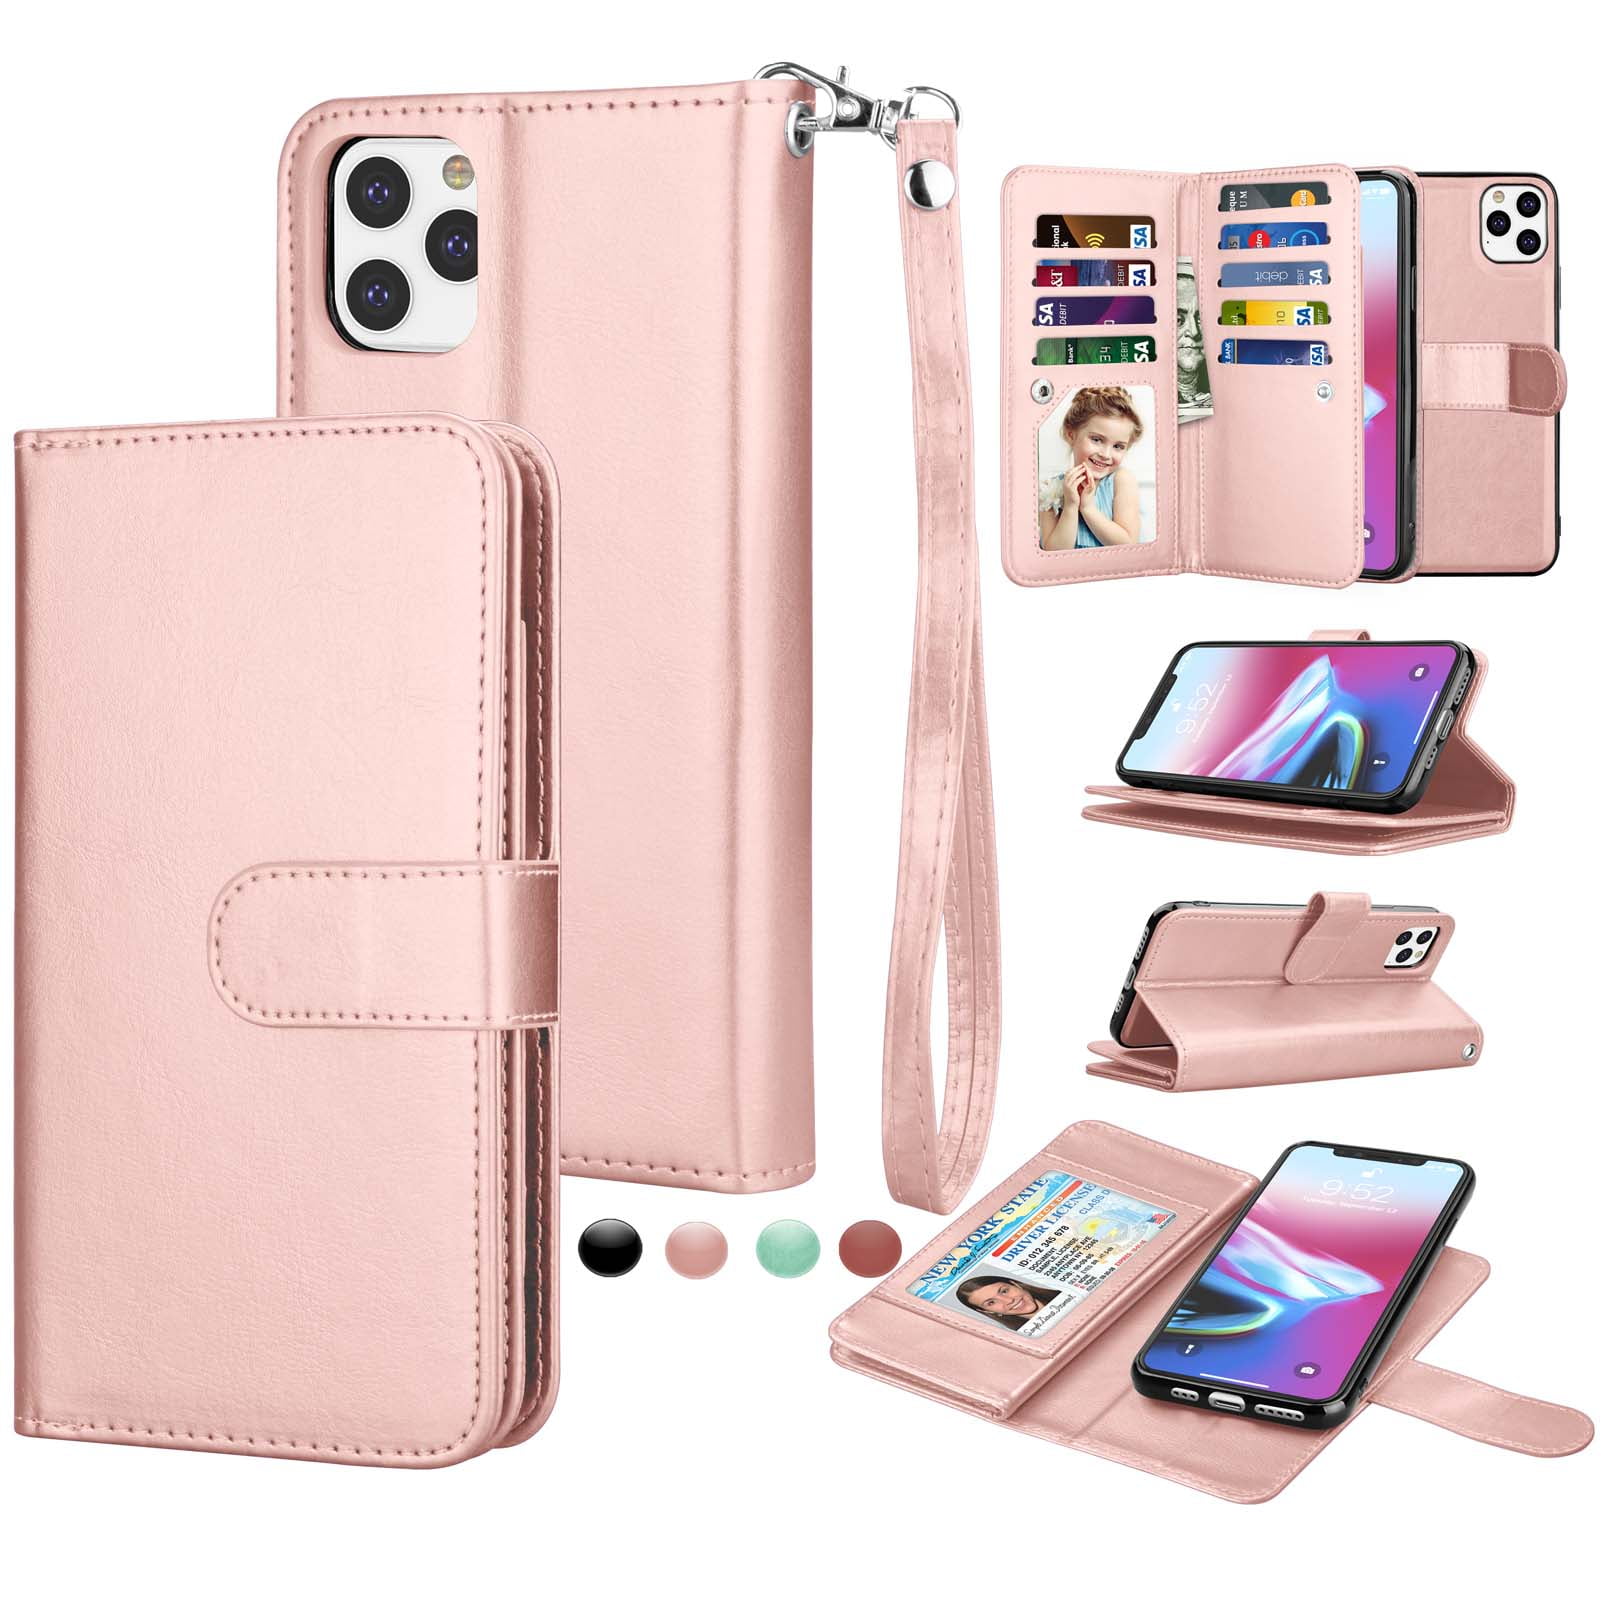 PU Leather Flip Shockproof Wallet Stand Magnet Buckle Notebook Reevermap Compatible iPhone 11 Case Phone Cover for iPhone 11 